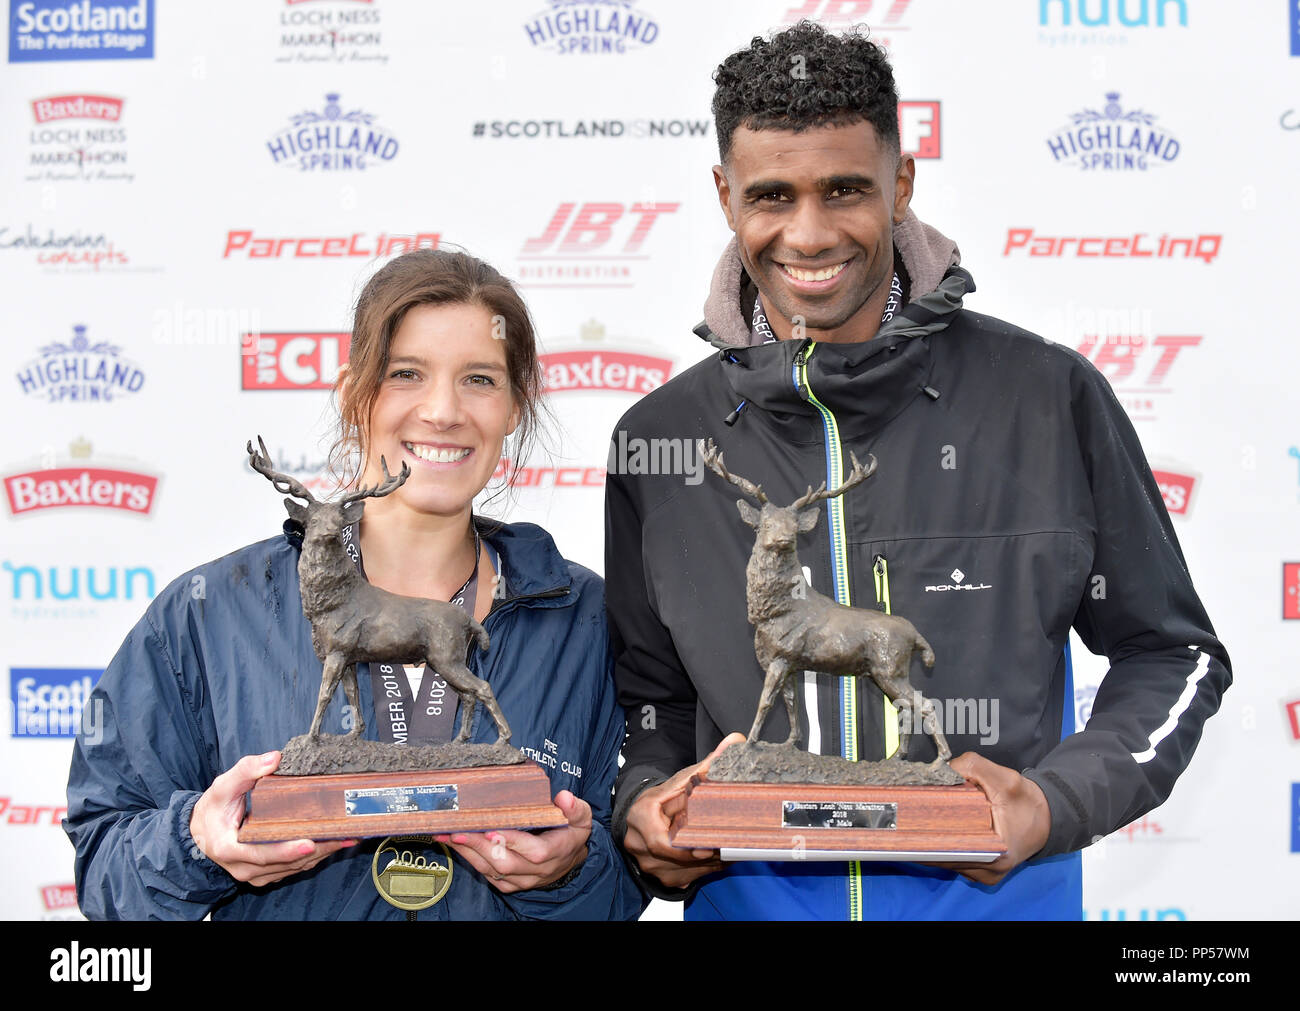 Scotland, UK. 23rd Sept 2018. 2018 Baxters Loch Ness Marathon PICTURED L-R woman winner Sheena Logan from Fife (2.51.11) with the mens winner Mohammad Aburezeq from Altrincham & District AC (02.22.56) Credit: sandy young/Alamy Live News Stock Photo